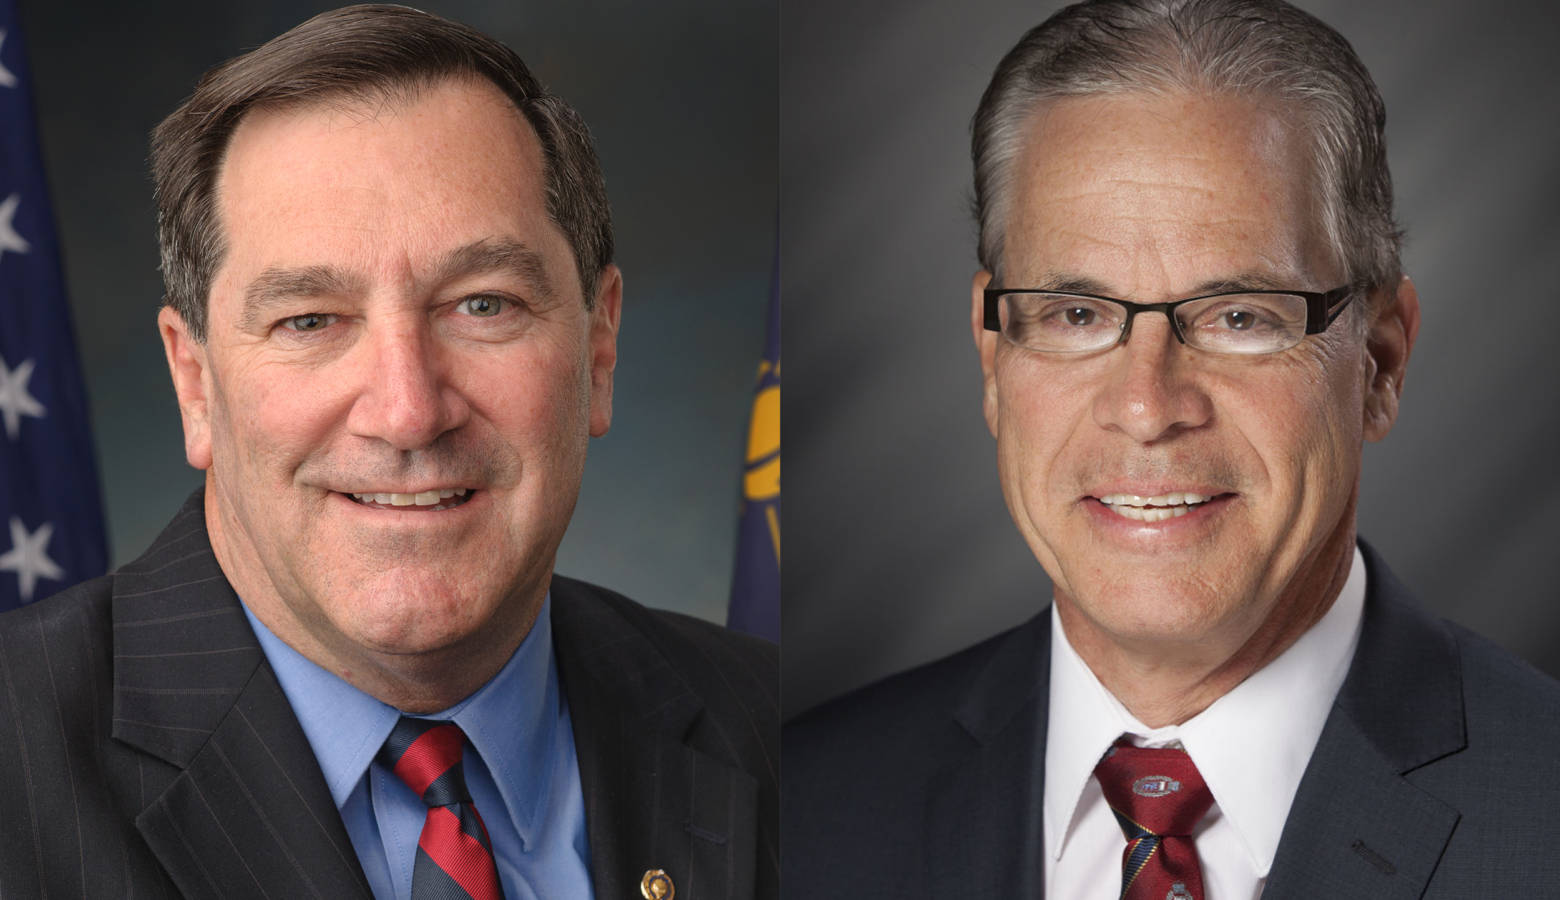 Sen. Joe Donnelly (D-Ind.), left, and Republican Senate candidate Mike Braun, right, don't agree on who's to blame for the Trump administration's family separation policy. (Photos courtesy of the U.S. Senate and the Indiana General Assembly)